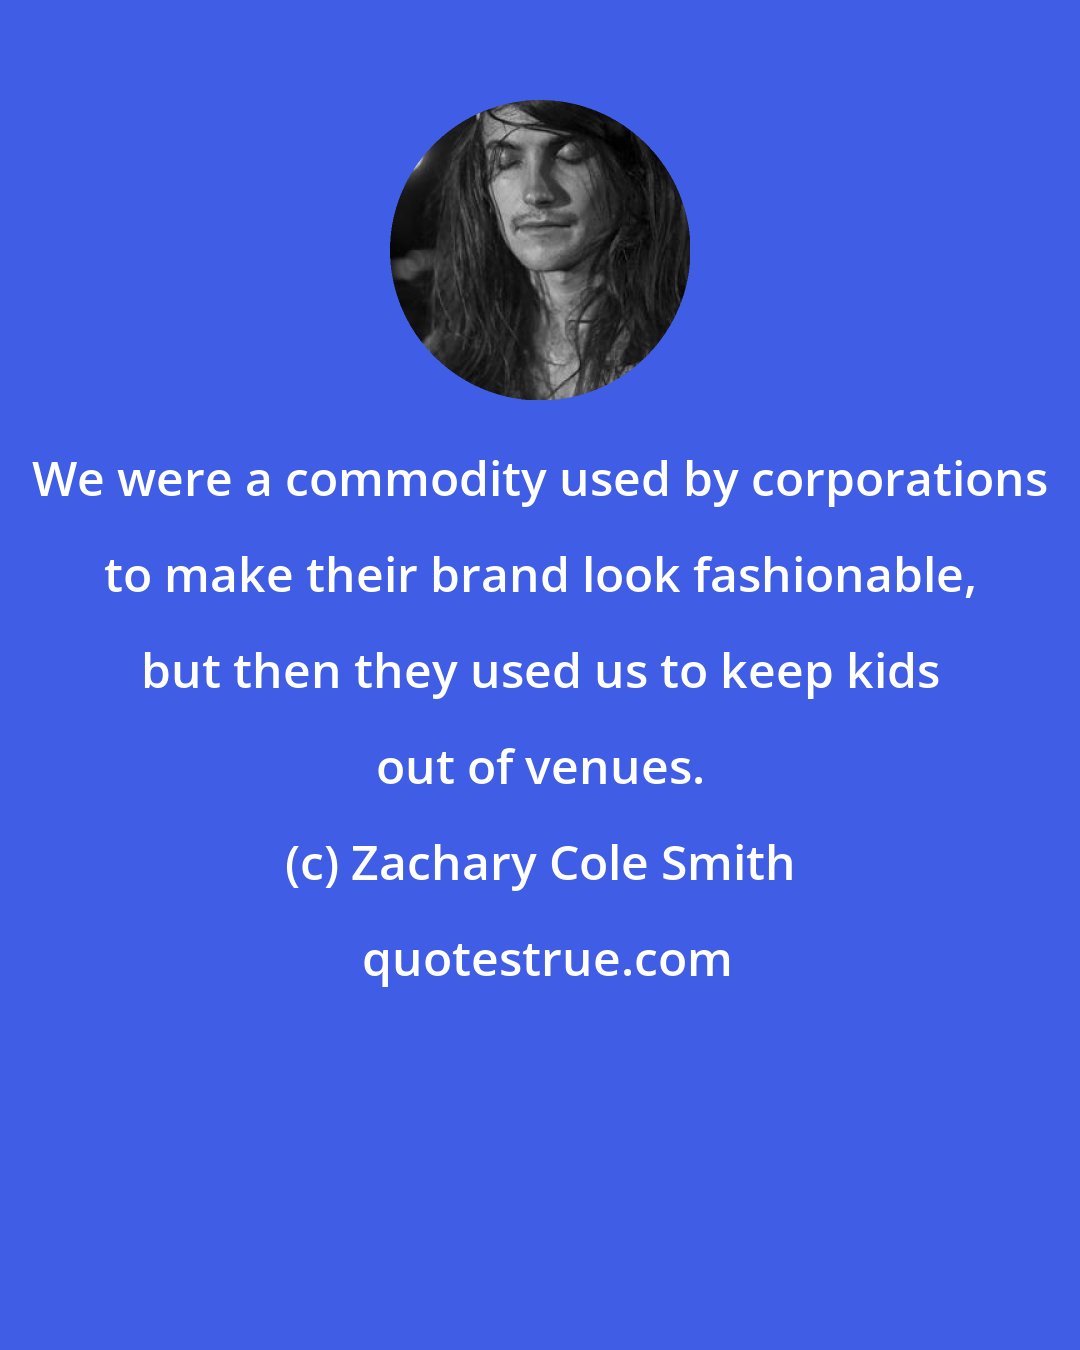 Zachary Cole Smith: We were a commodity used by corporations to make their brand look fashionable, but then they used us to keep kids out of venues.